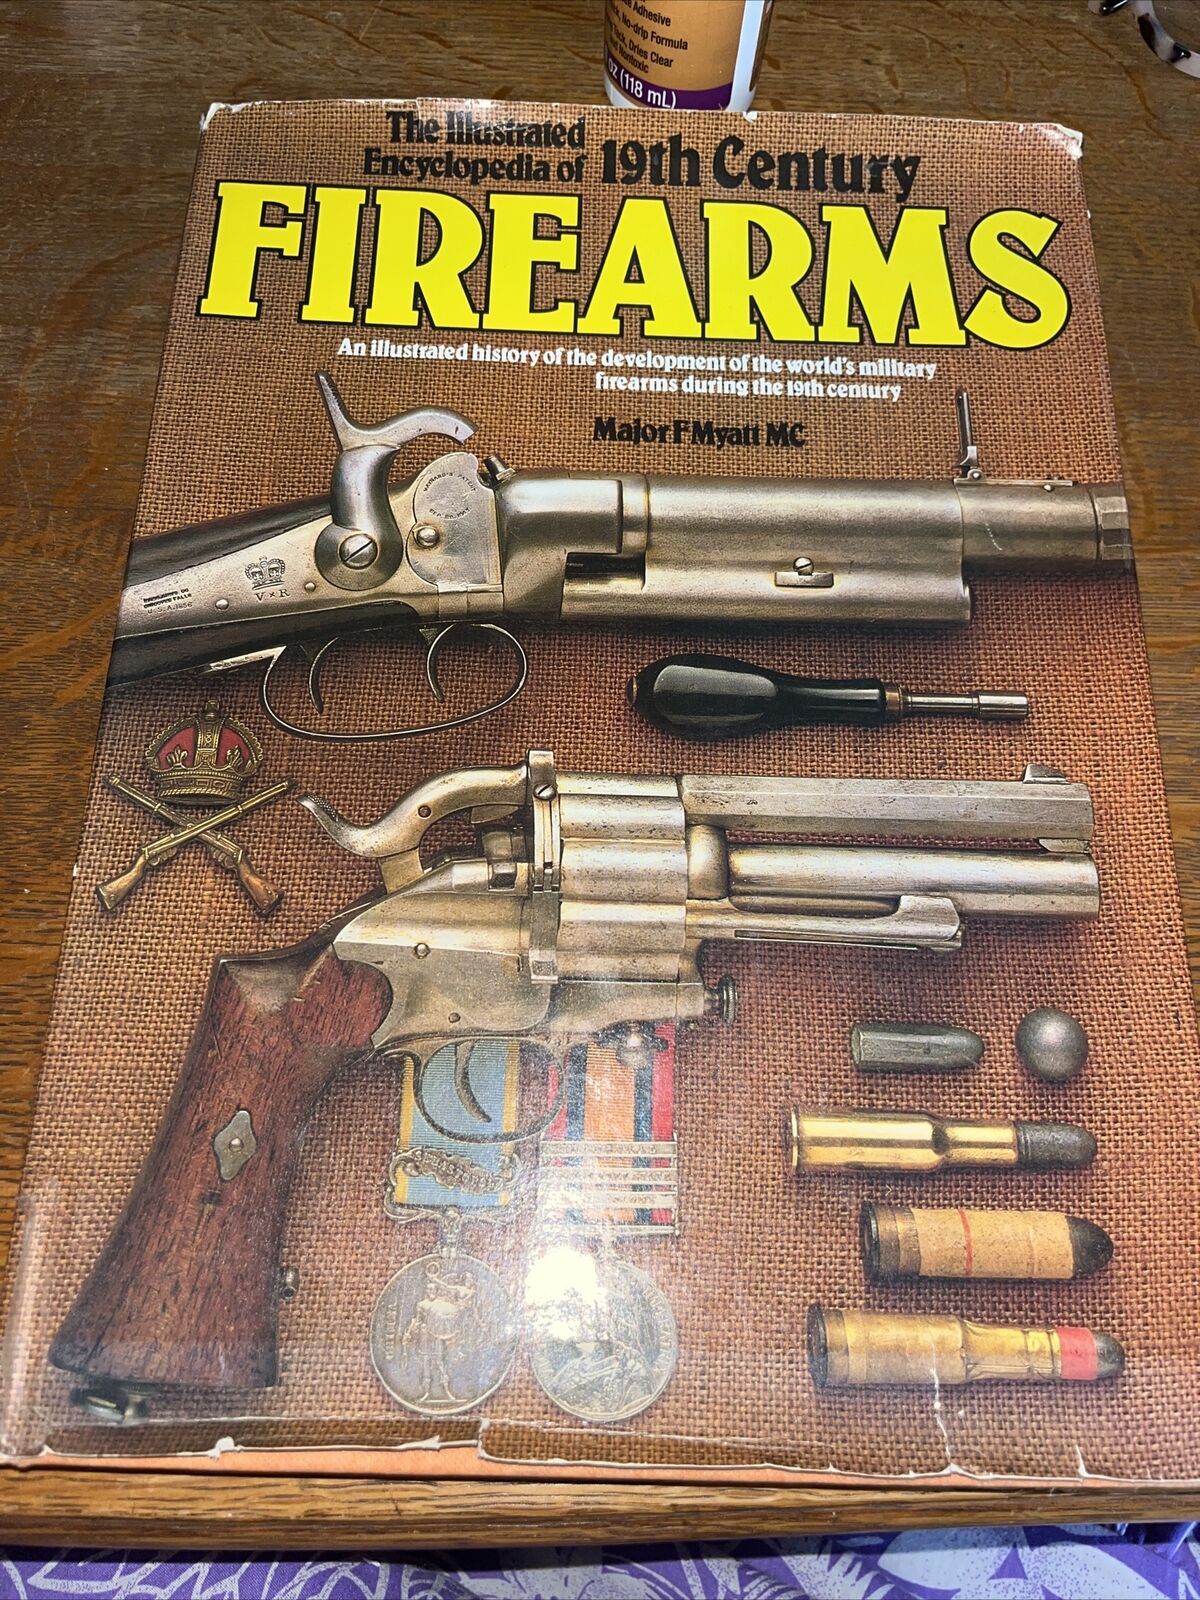 Firearms The Illustrated Encyclopedia Of 19th Century Major M Musty MC Book 216